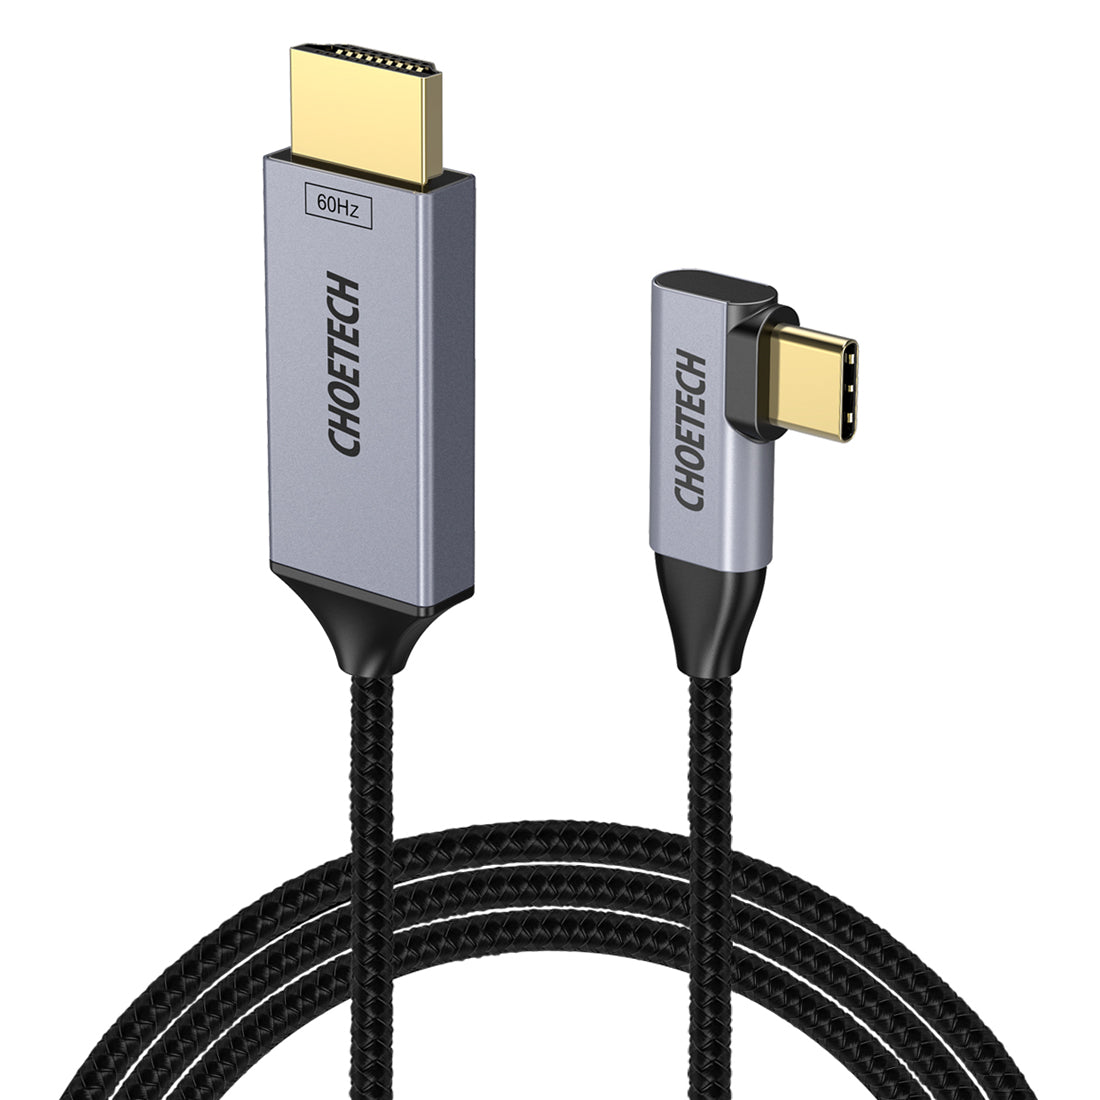 Yealink USB-C to HDMI Adapter Cable for MTouch II USBC-HDMI B&H